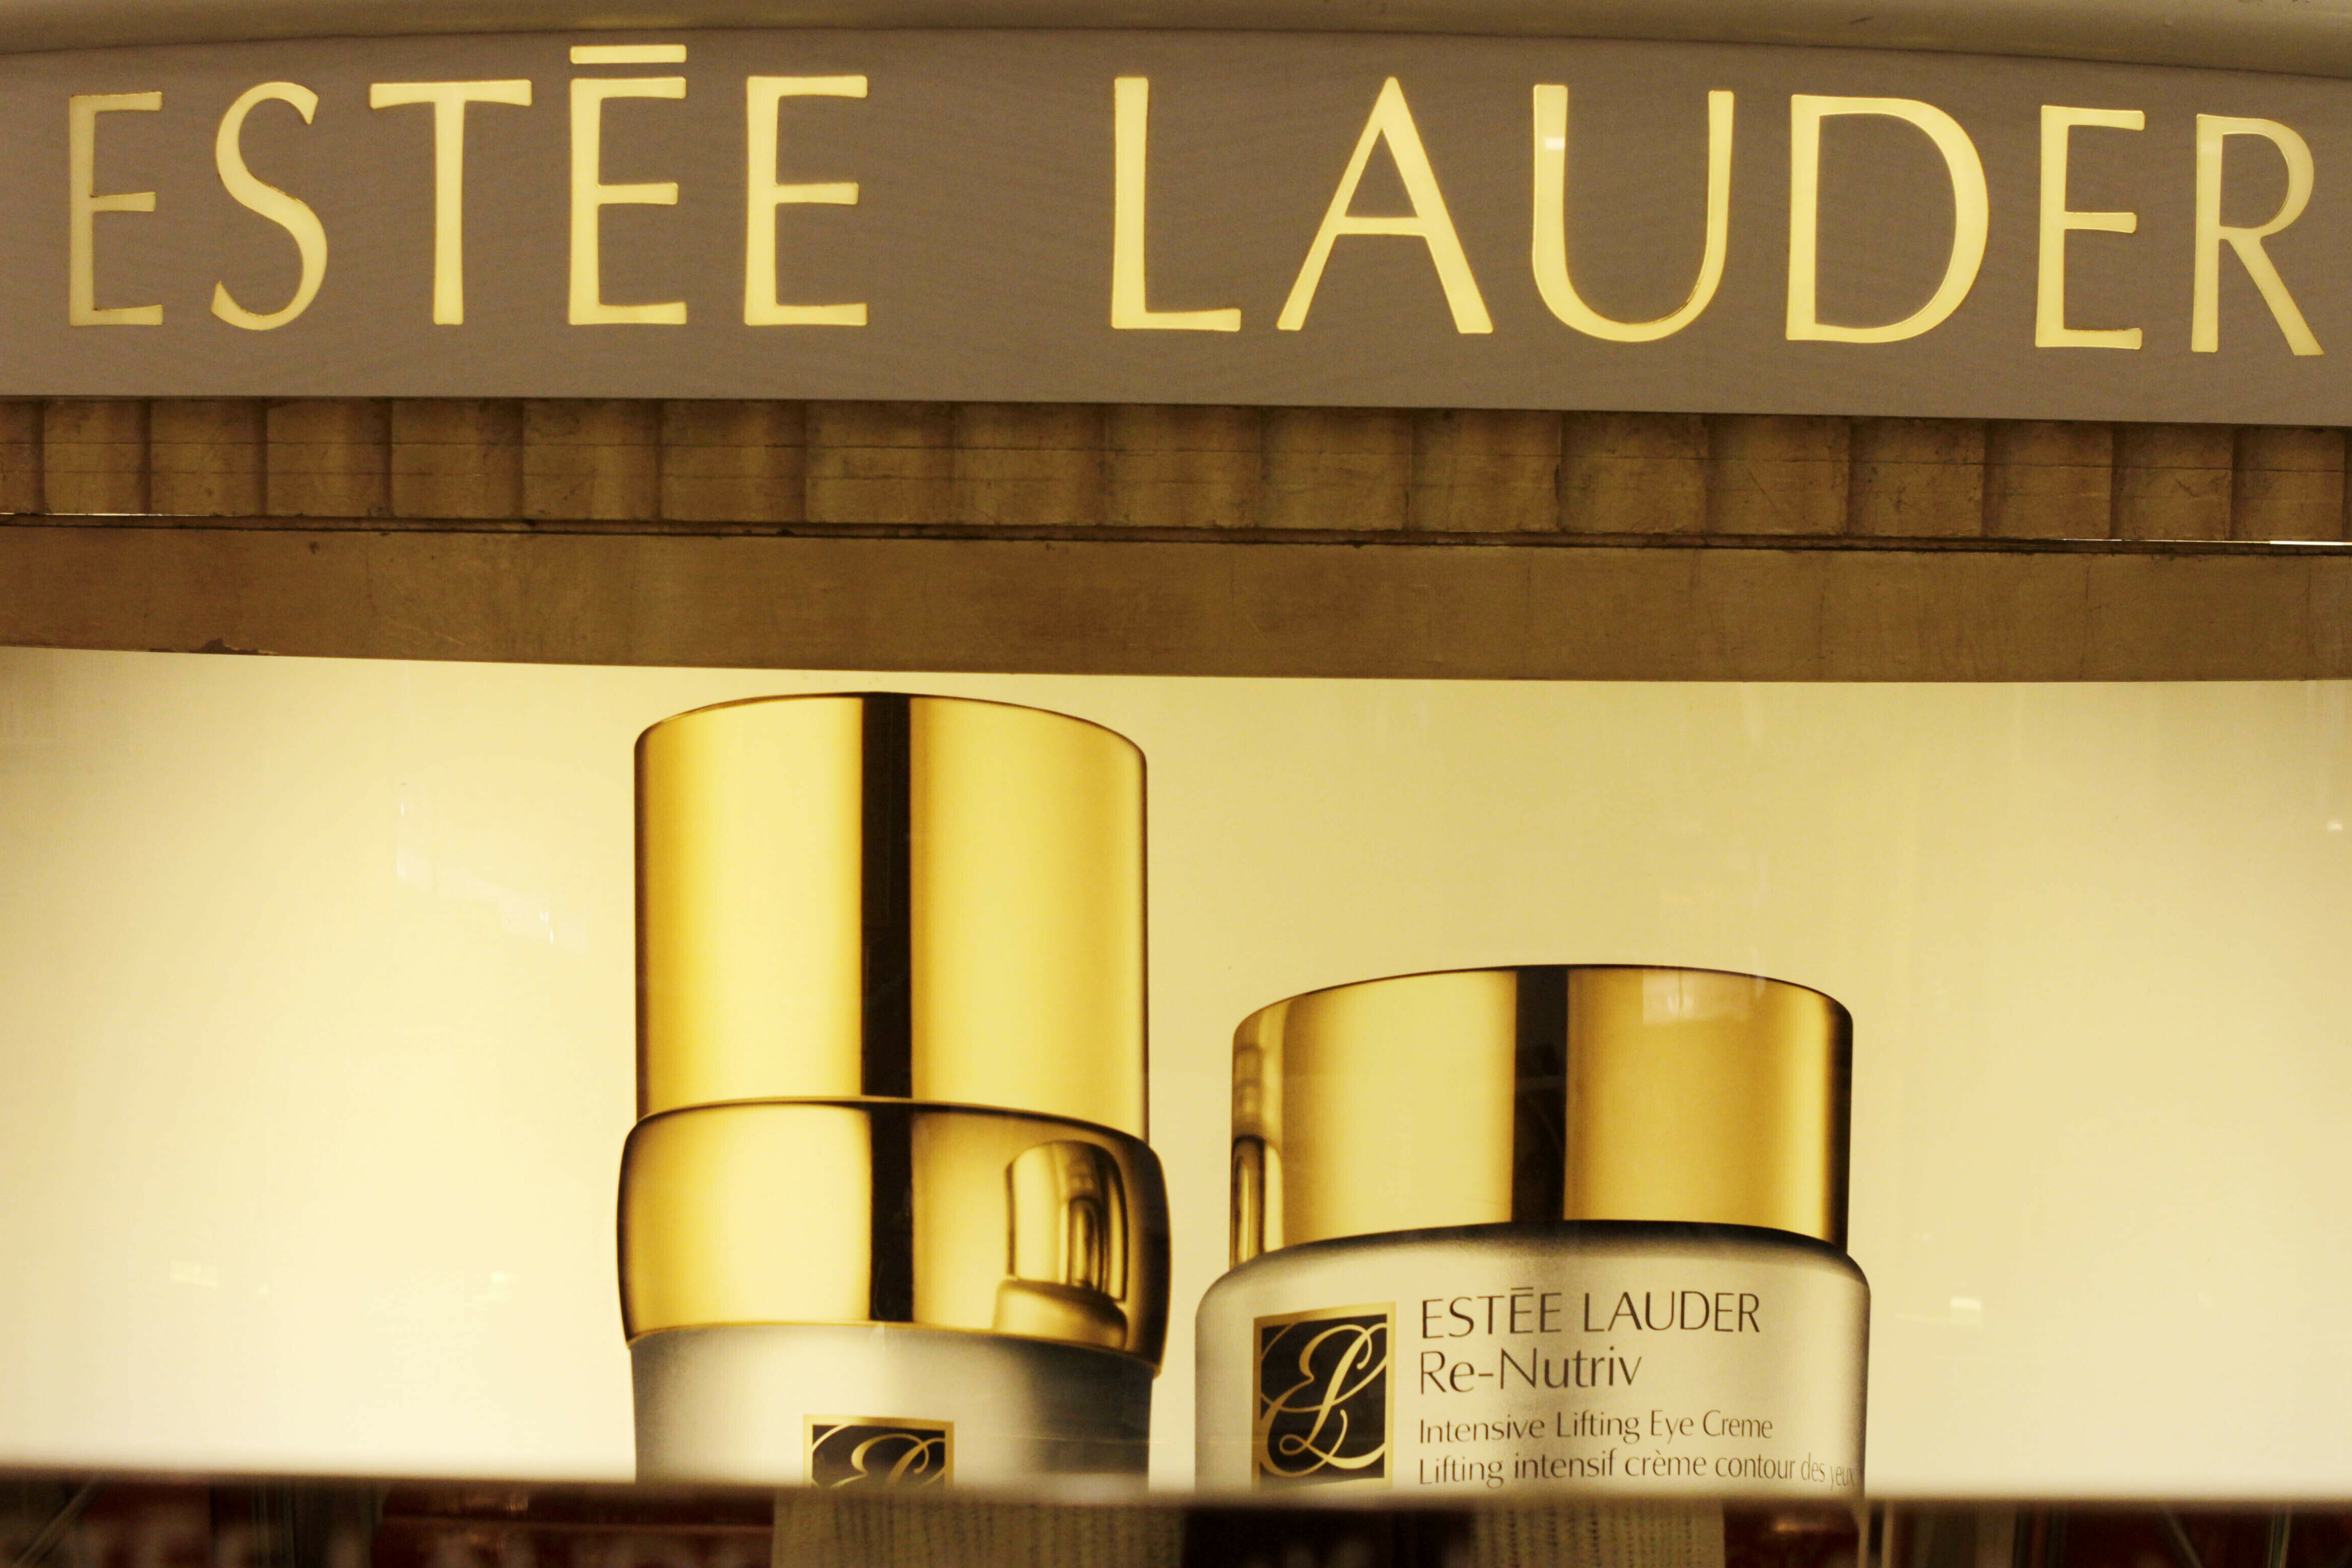 Estee Lauder to buy Tom Ford in a deal valued at $